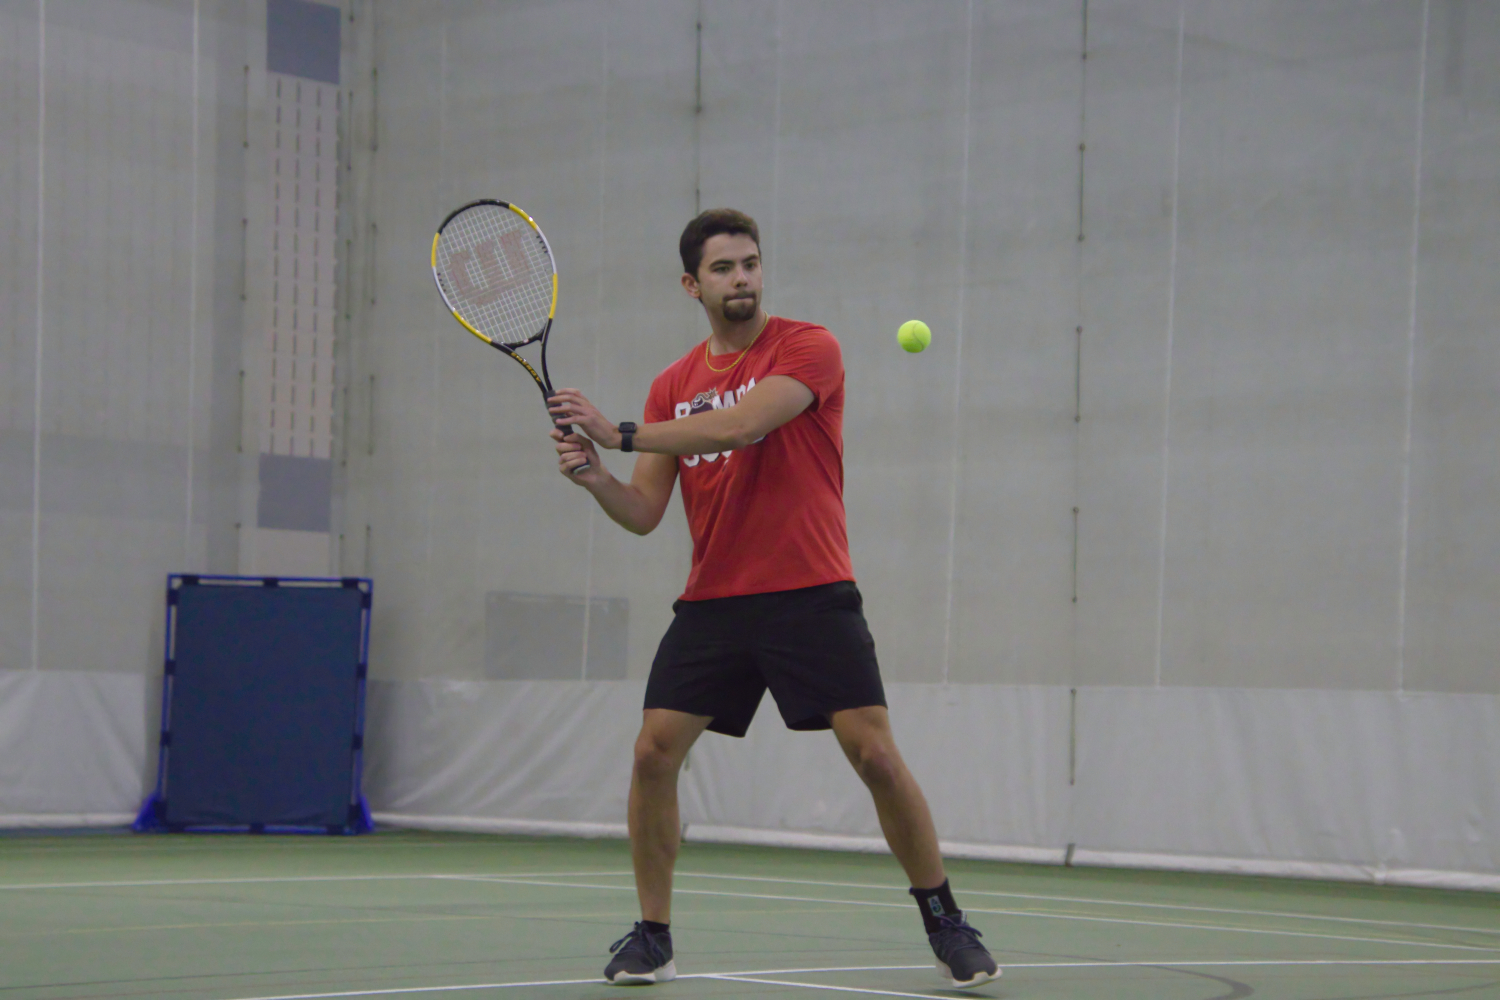 A male student pulling back a tennis racket to hit a ball